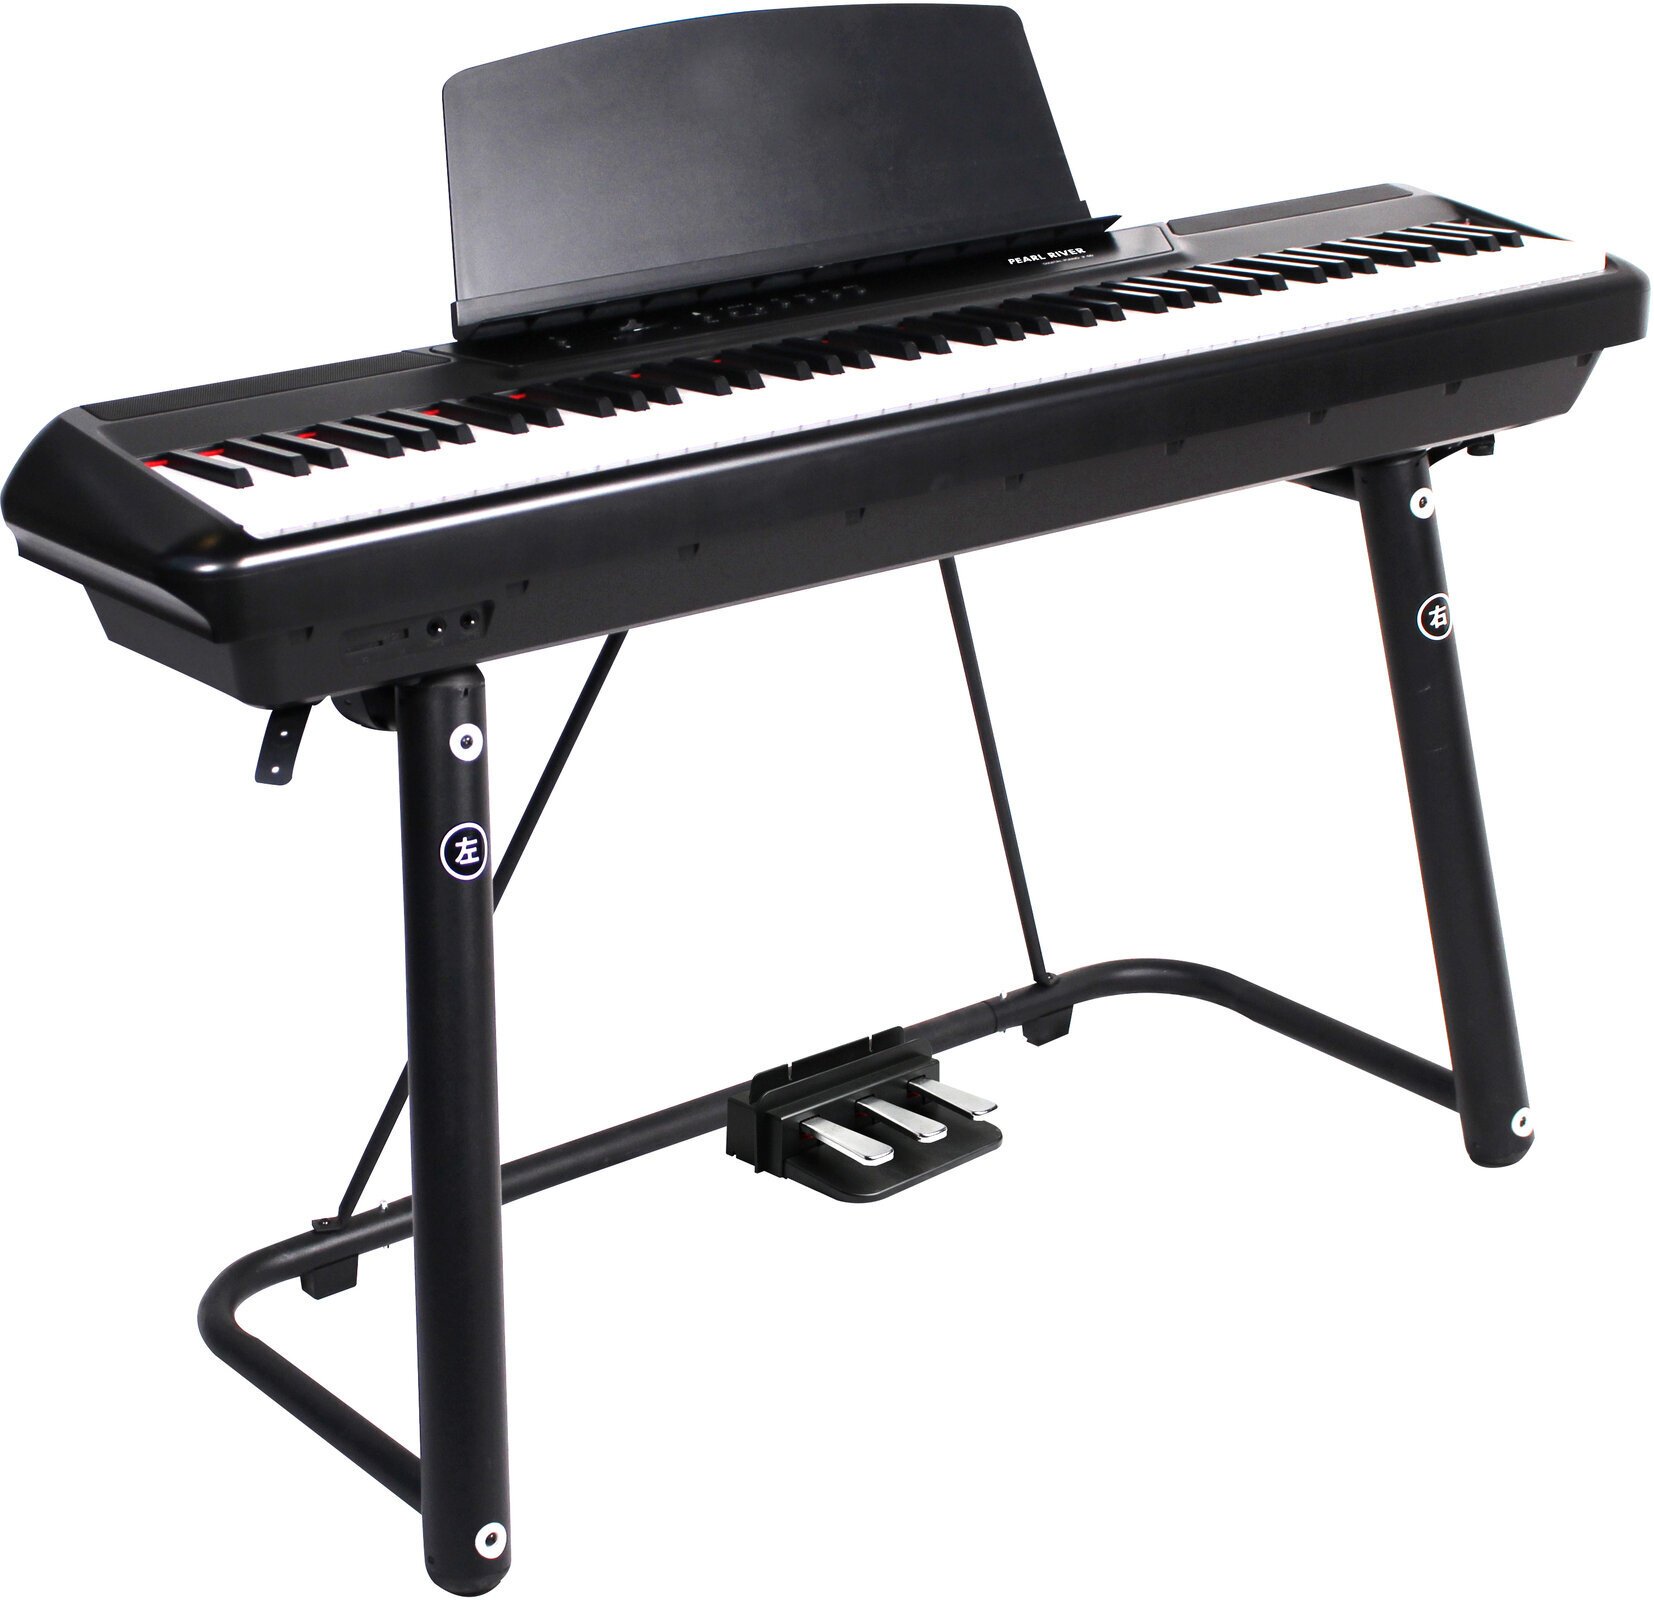 Digitaal stagepiano Pearl River P-60 Digitaal stagepiano